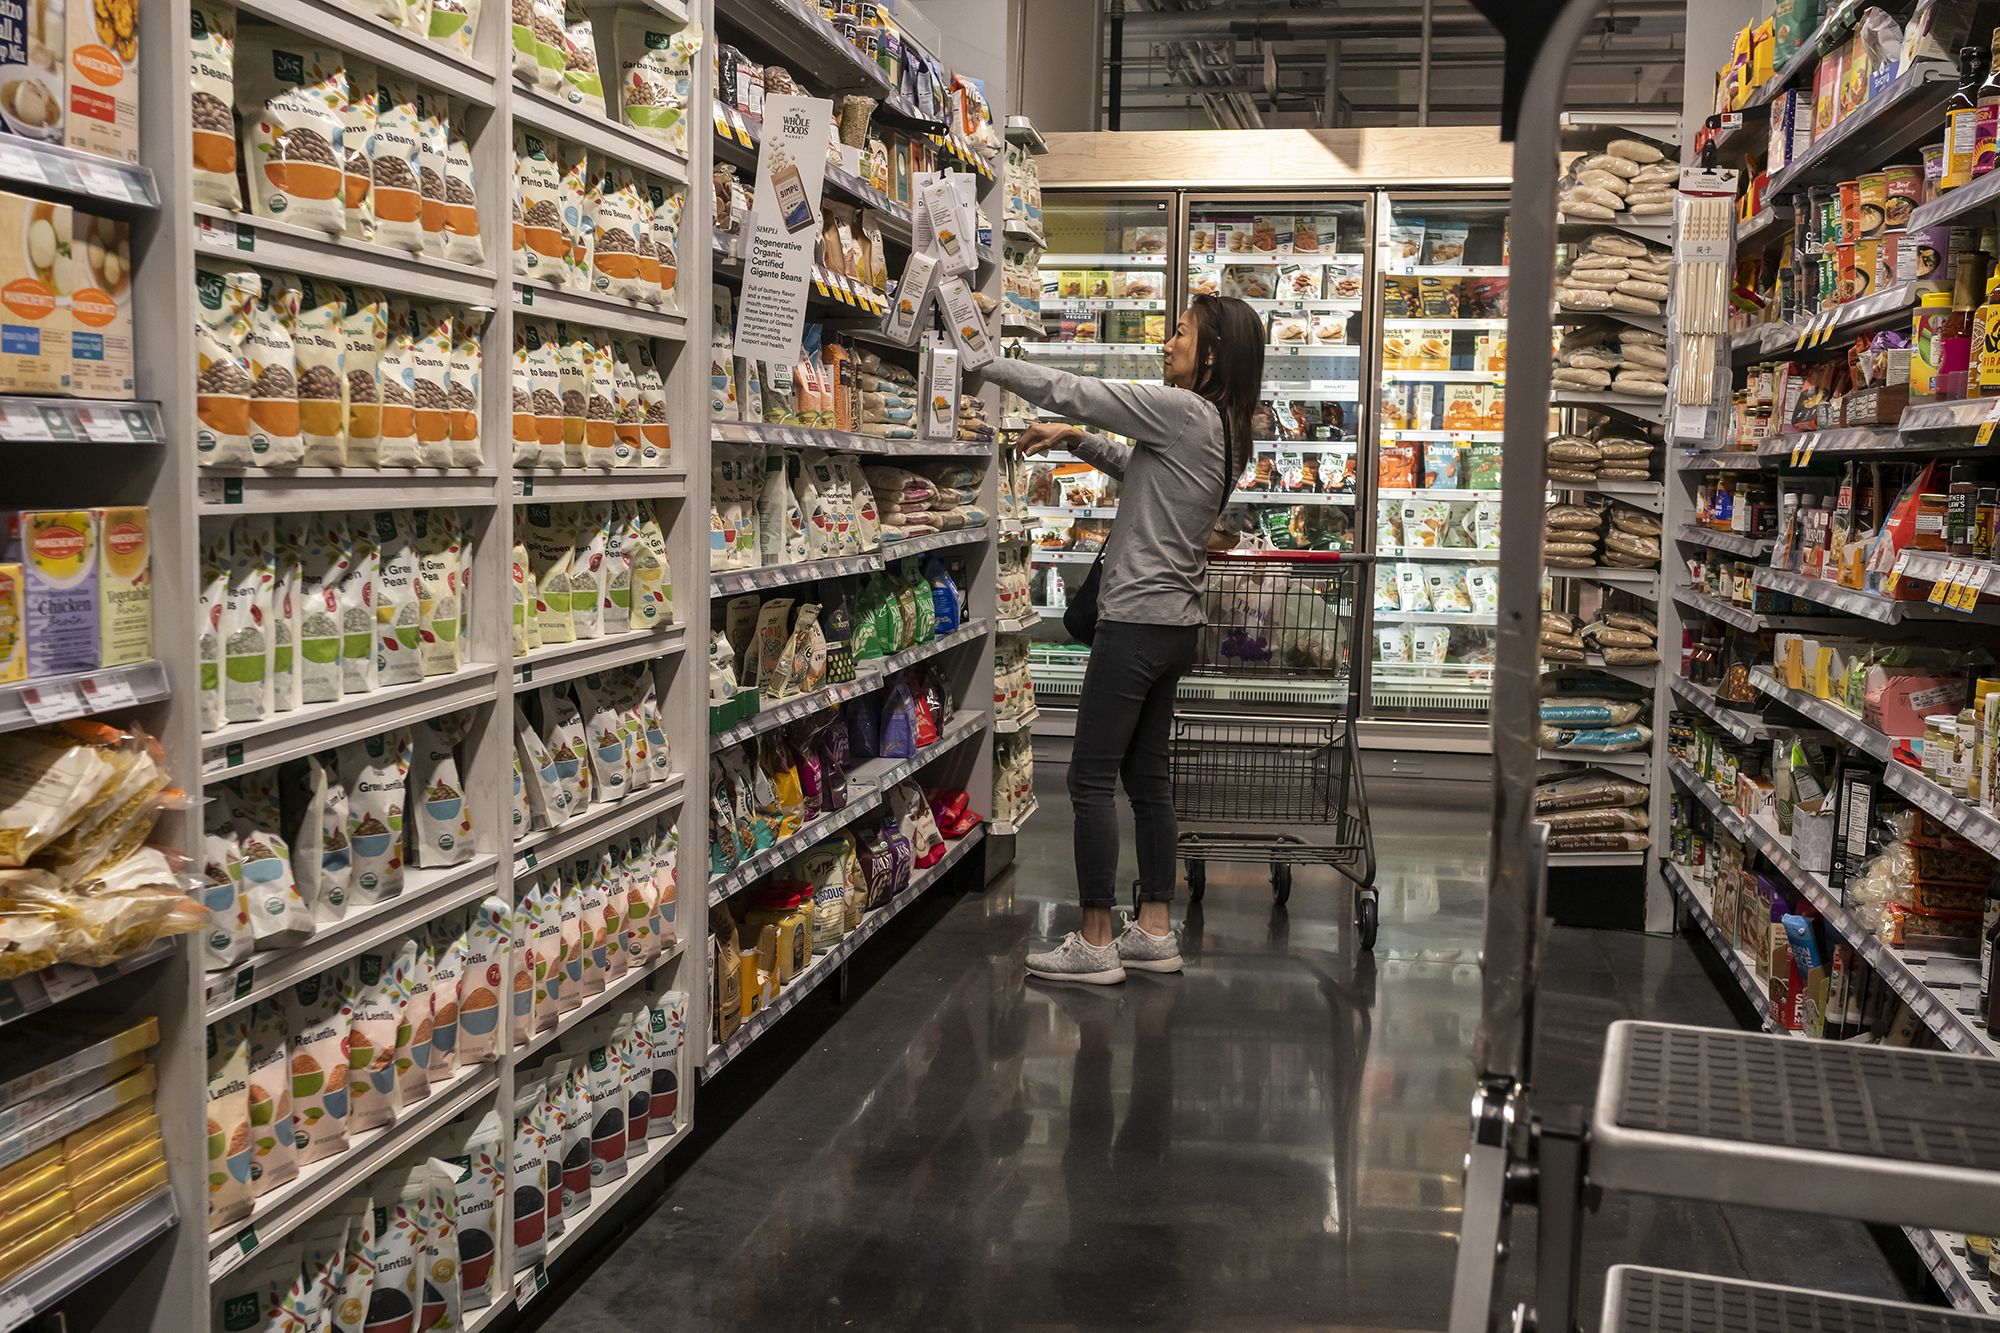 New York City's Grocery Stores Are Terrible Compared to the Midwest